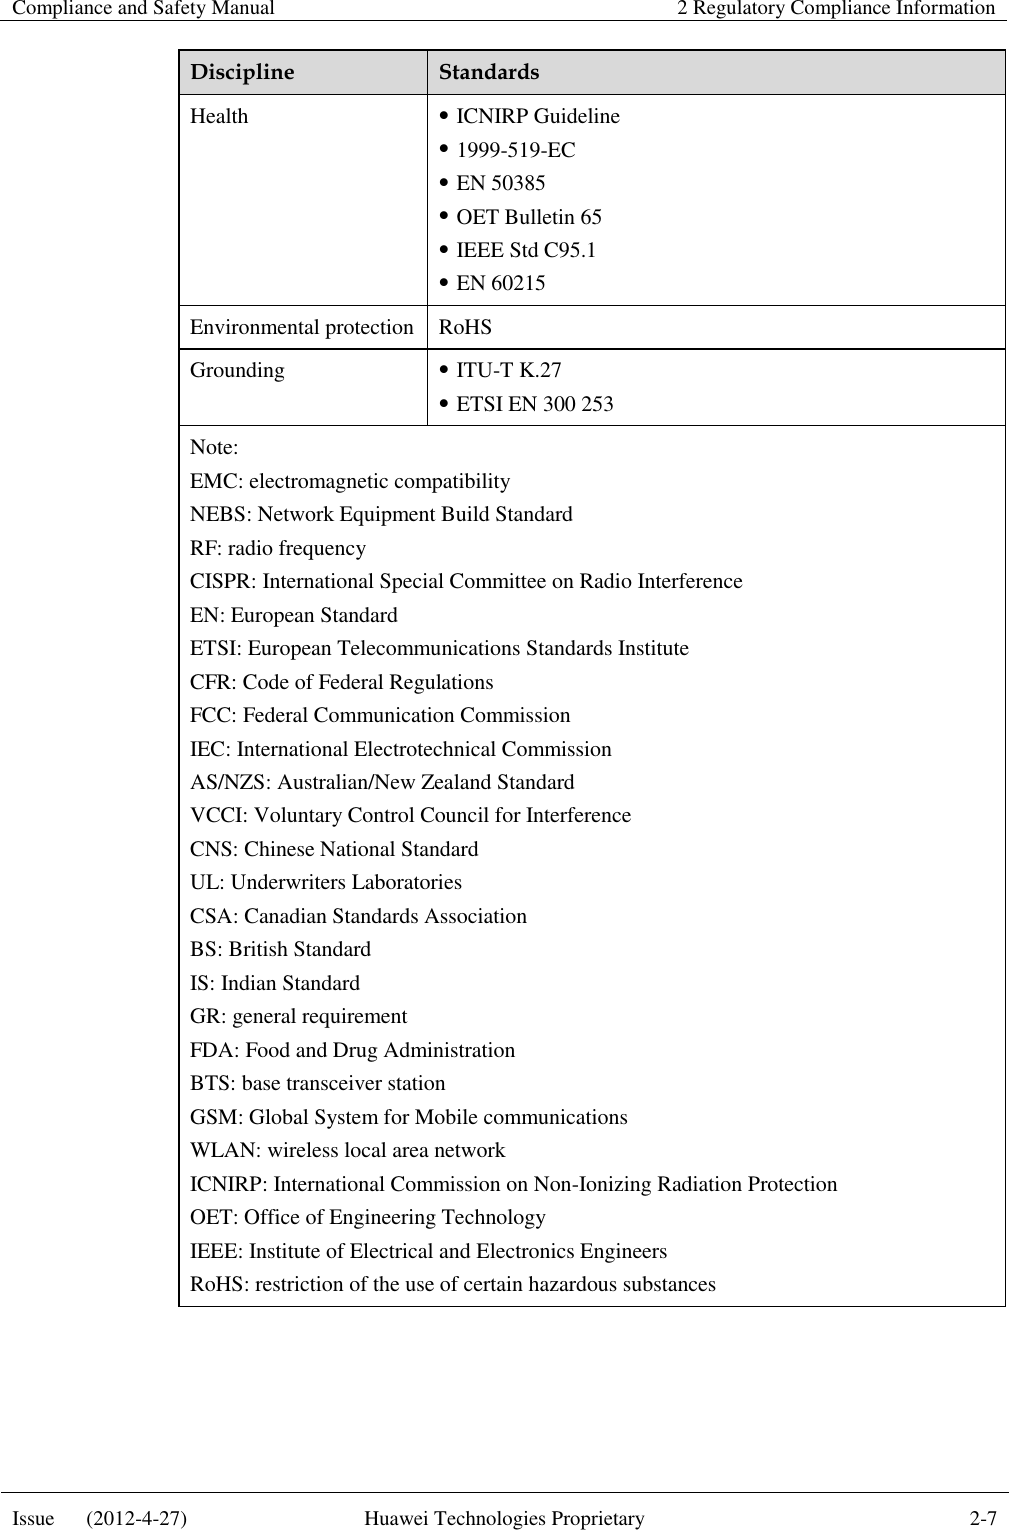 Compliance and Safety Manual 2 Regulatory Compliance Information  Issue      (2012-4-27) Huawei Technologies Proprietary 2-7  Discipline Standards Health  ICNIRP Guideline  1999-519-EC  EN 50385  OET Bulletin 65  IEEE Std C95.1  EN 60215 Environmental protection RoHS Grounding  ITU-T K.27  ETSI EN 300 253 Note: EMC: electromagnetic compatibility NEBS: Network Equipment Build Standard RF: radio frequency CISPR: International Special Committee on Radio Interference EN: European Standard ETSI: European Telecommunications Standards Institute CFR: Code of Federal Regulations FCC: Federal Communication Commission IEC: International Electrotechnical Commission AS/NZS: Australian/New Zealand Standard VCCI: Voluntary Control Council for Interference CNS: Chinese National Standard UL: Underwriters Laboratories CSA: Canadian Standards Association BS: British Standard IS: Indian Standard GR: general requirement FDA: Food and Drug Administration BTS: base transceiver station GSM: Global System for Mobile communications WLAN: wireless local area network ICNIRP: International Commission on Non-Ionizing Radiation Protection OET: Office of Engineering Technology IEEE: Institute of Electrical and Electronics Engineers RoHS: restriction of the use of certain hazardous substances  